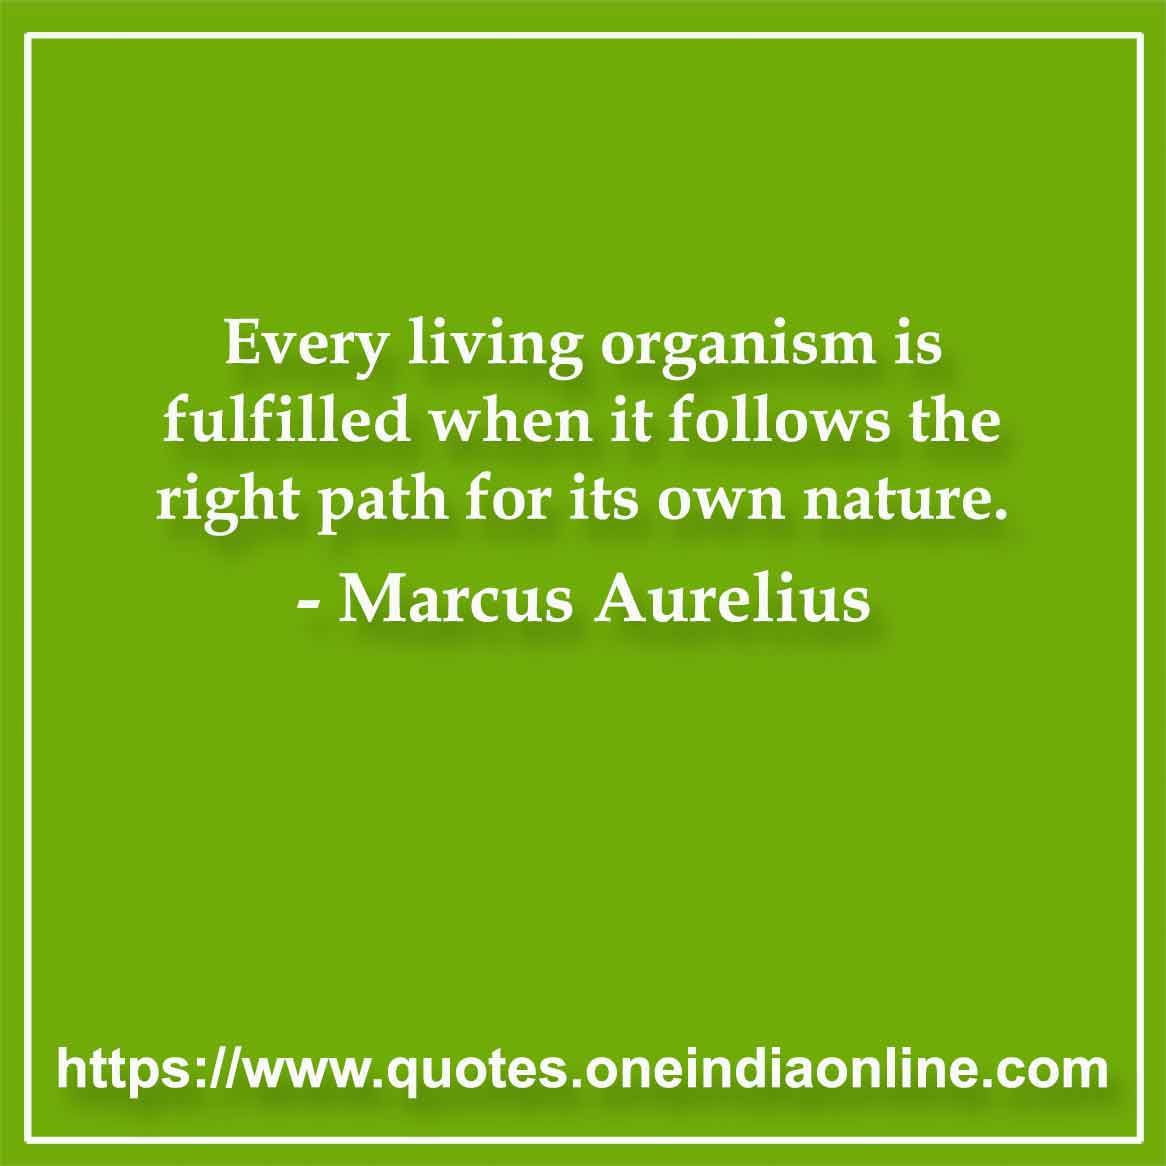 Every living organism is fulfilled when it follows the right path for its own nature. 

-  by Marcus Aurelius